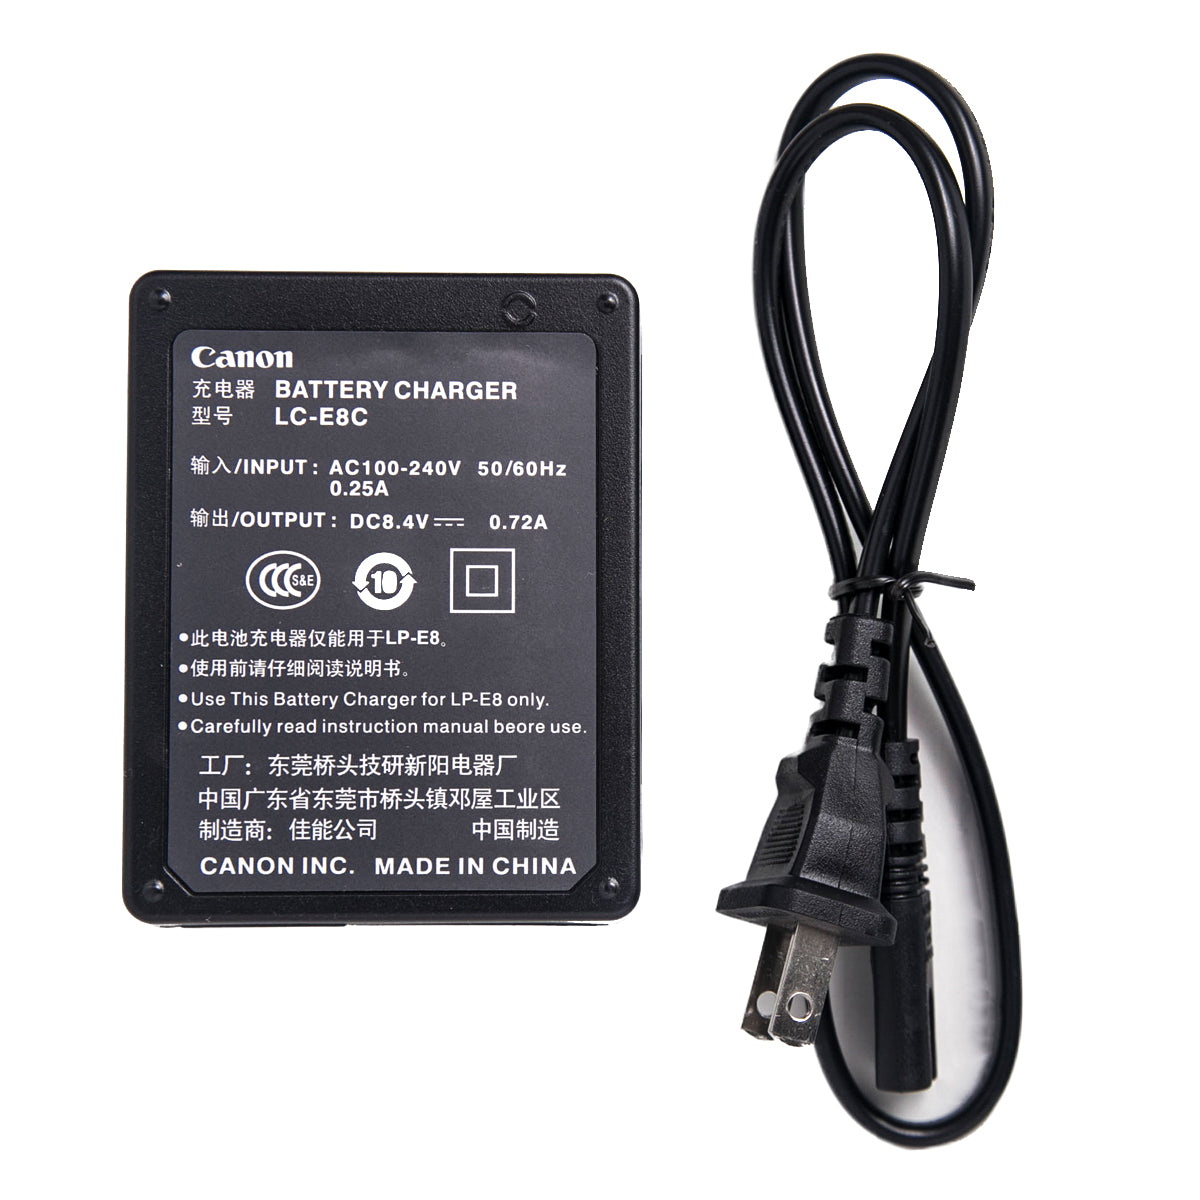 Pxel Canon LC-E8 Replacement Battery Charger for Canon LP-E8 Lithium-Ion Batteries EOS 550D/600D/650D/700D Rebel T2i/T3i/T4i/T5i Cameras (Class A)